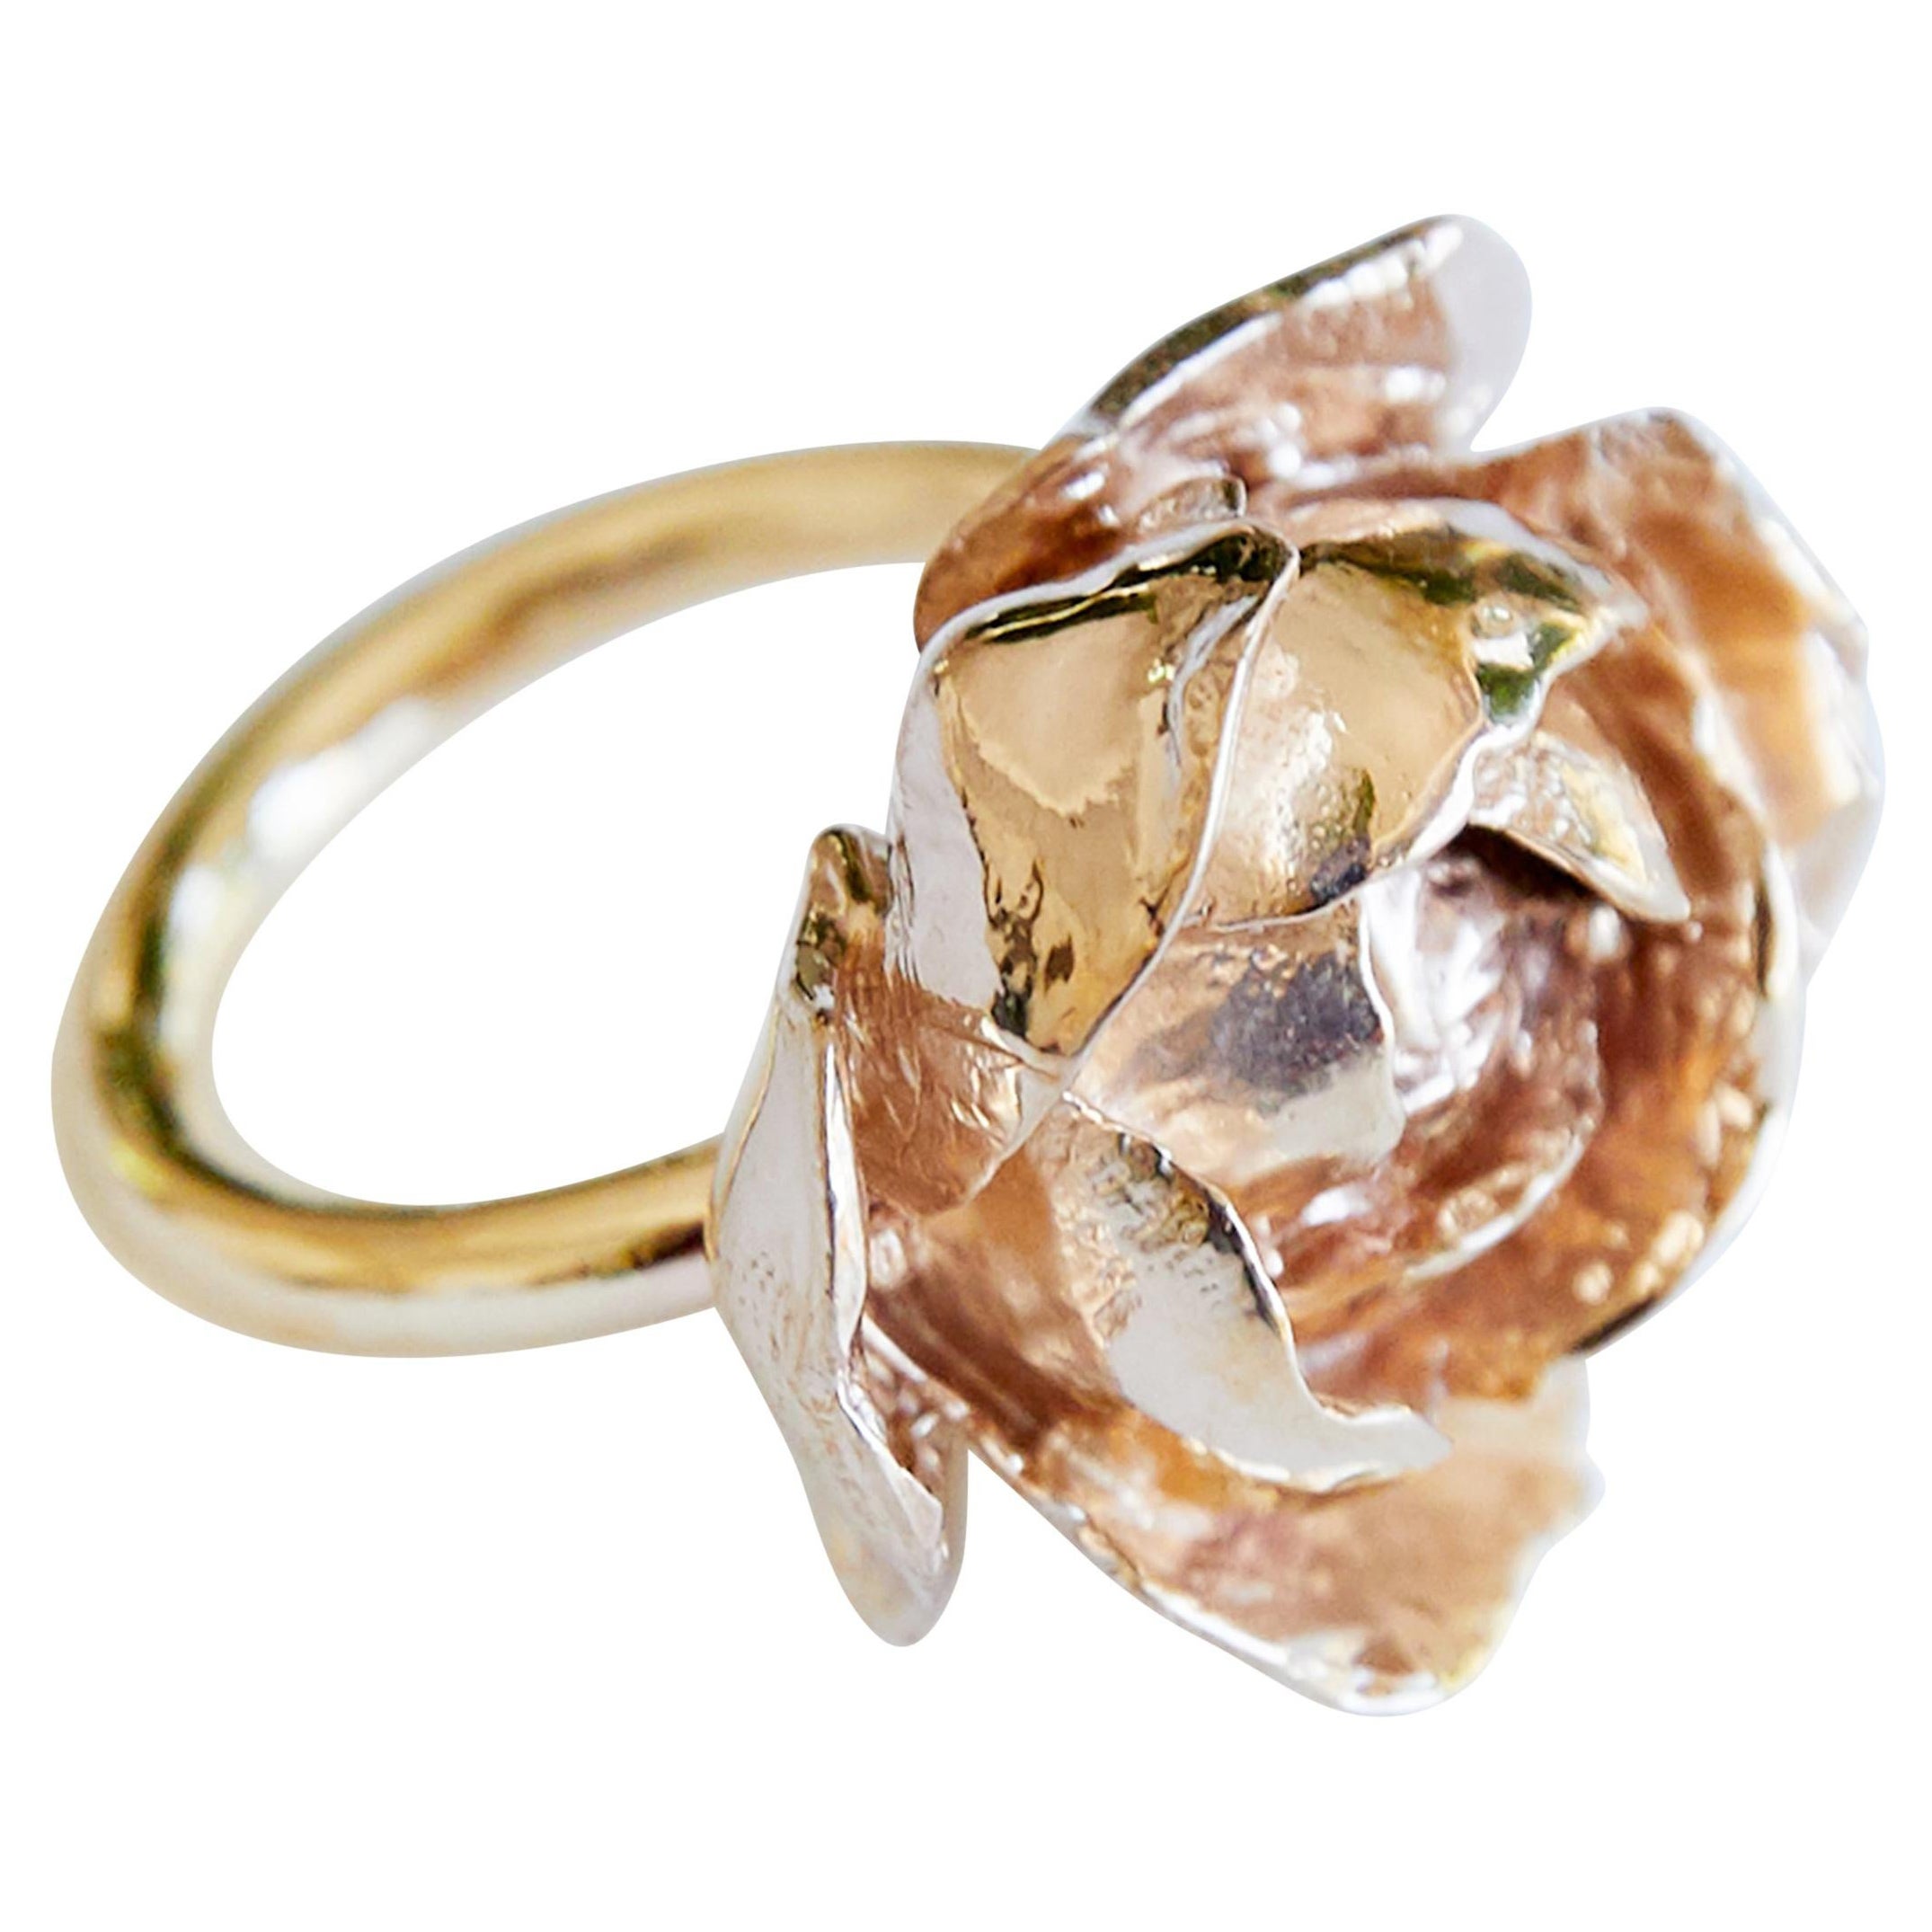 Rose Ring Gold Plated J Dauphin
J DAUPHIN 